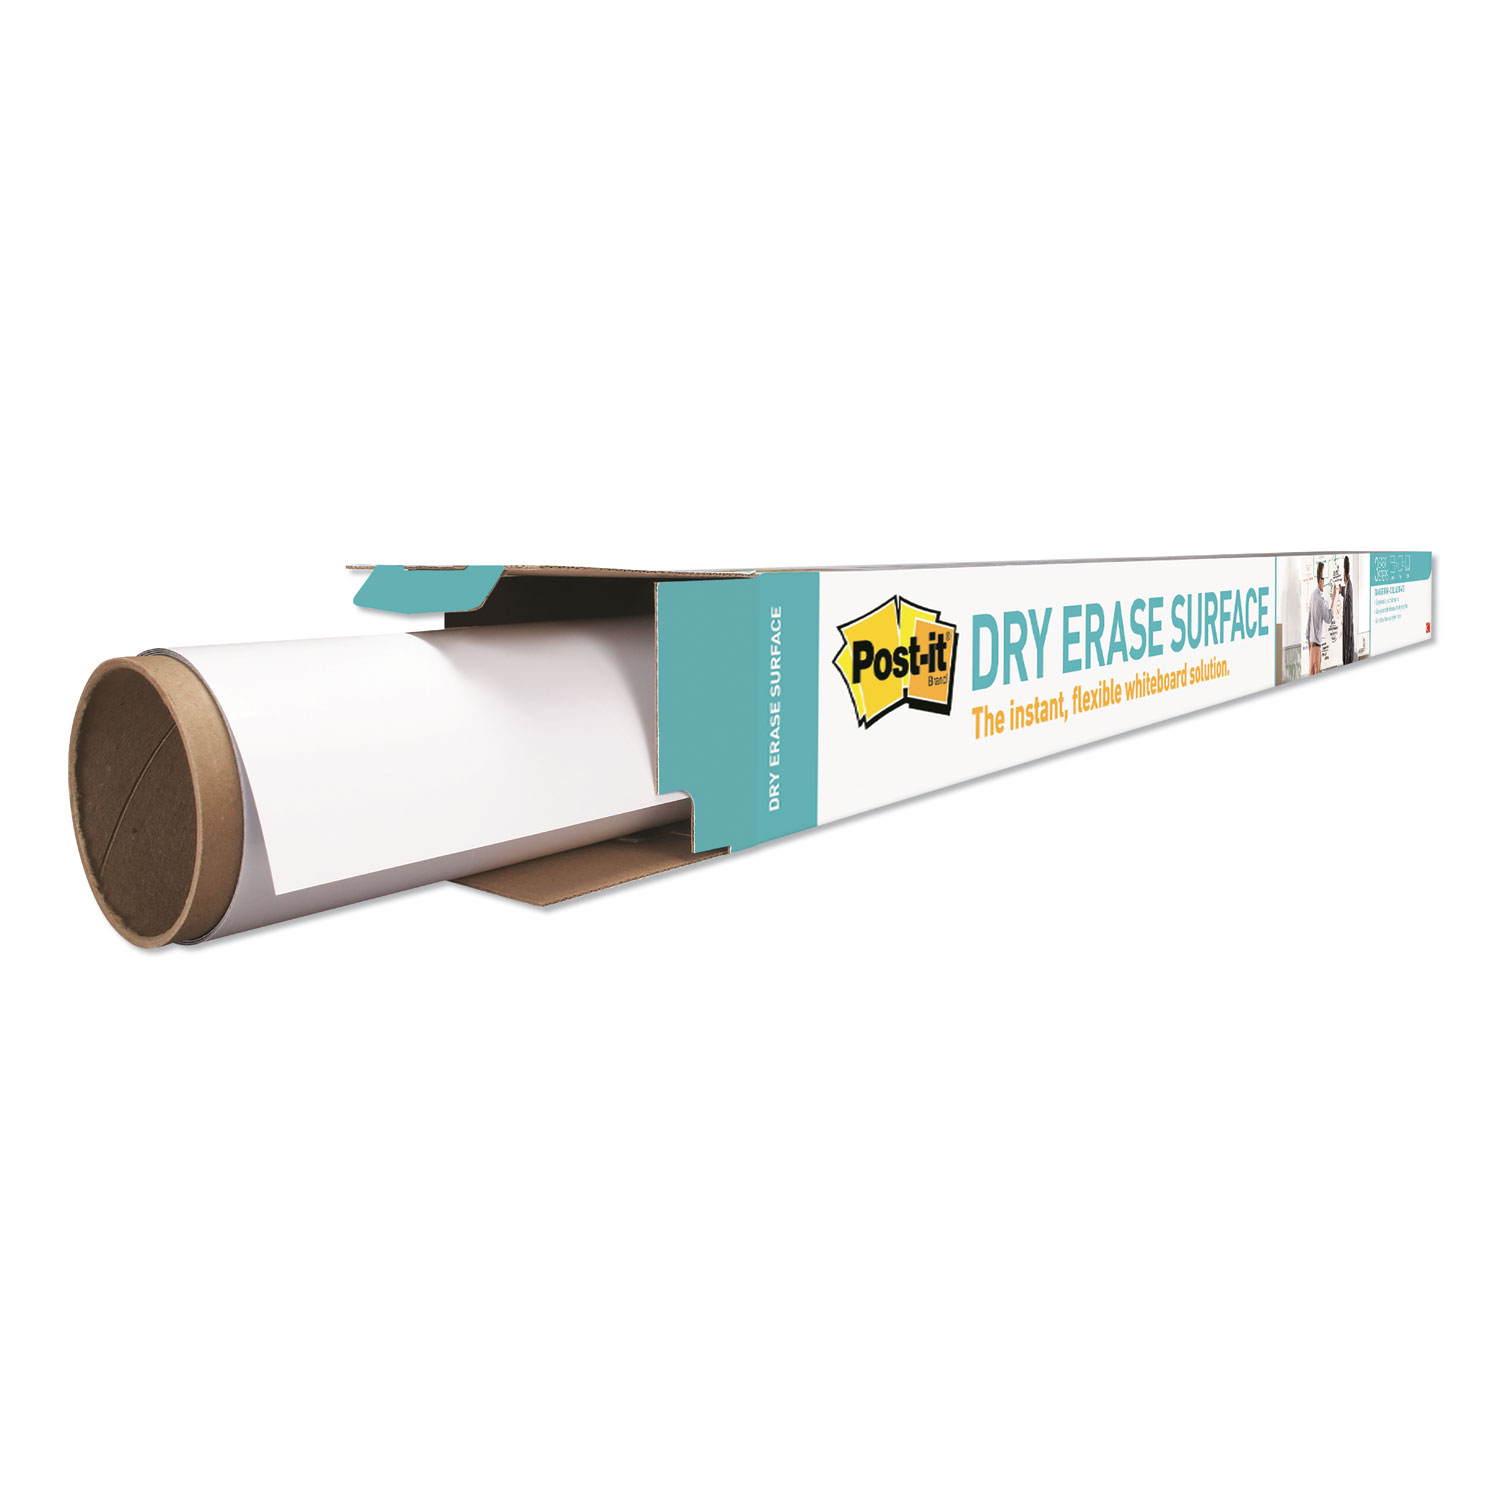  Post-it DEF8X4 Dry Erase Surface with Adhesive Backing, 96 x 48, White (MMMDEF8X4) 